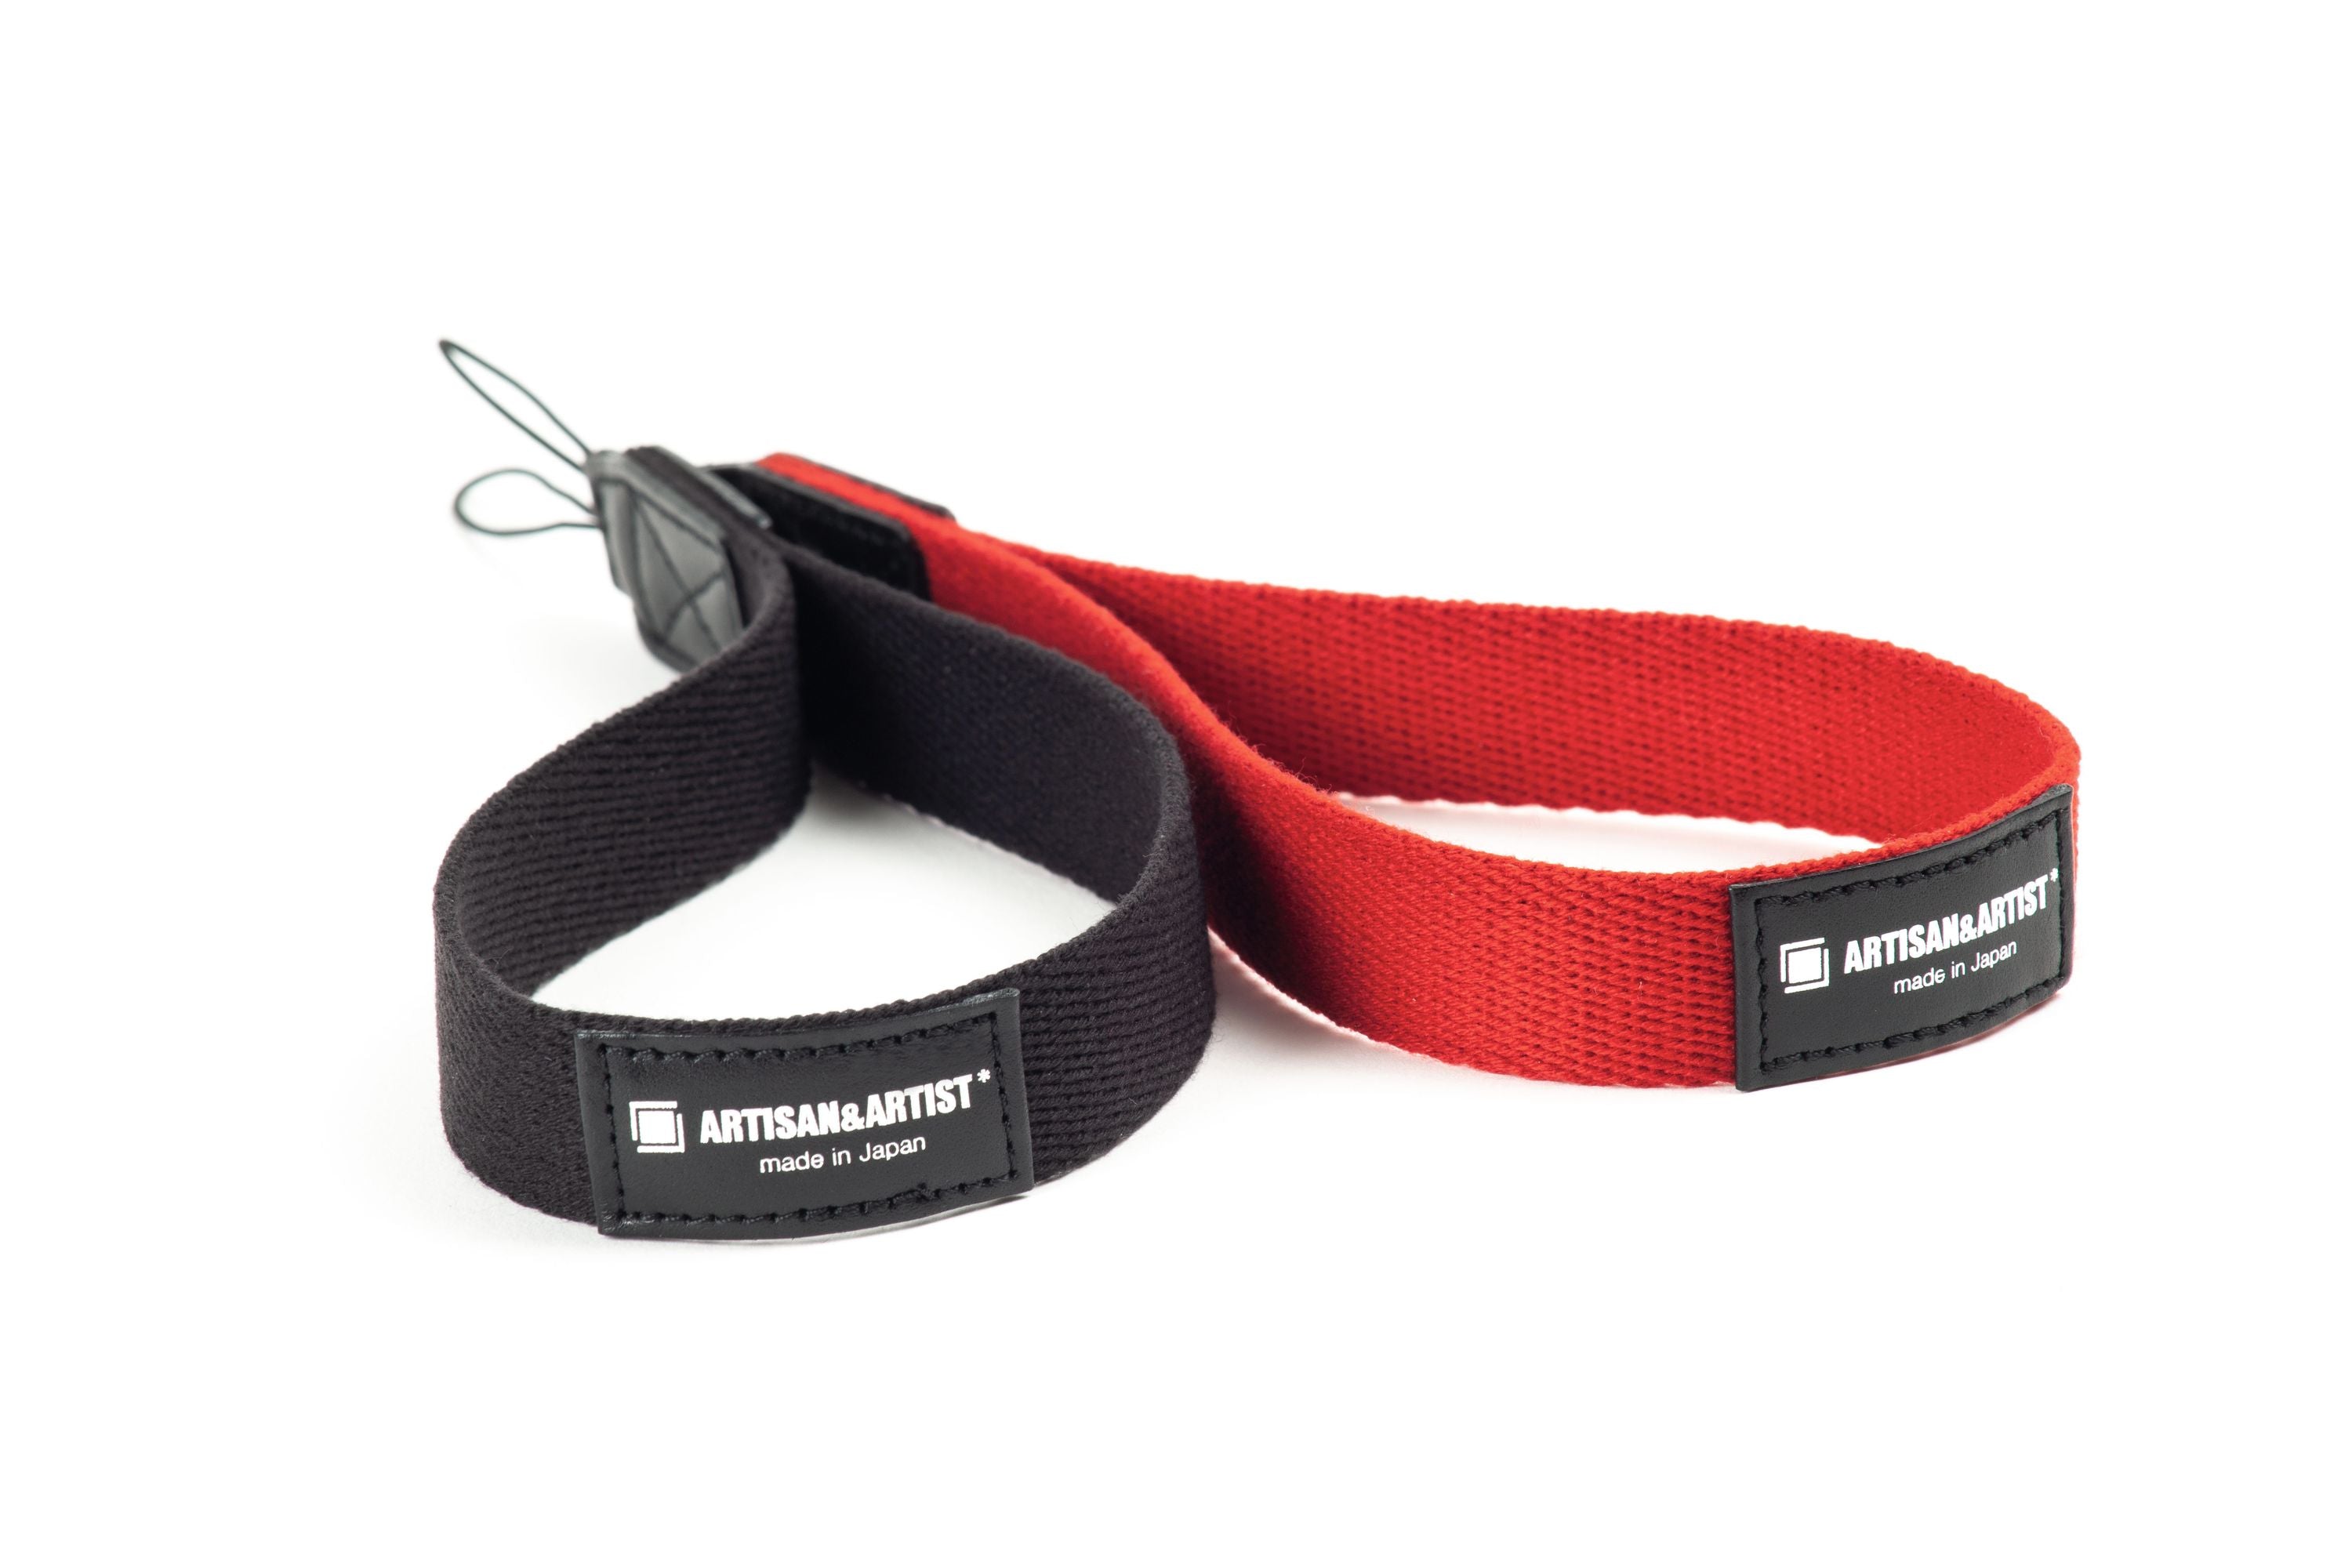 ACAM-296 Wrist Cloth Strap With Loop Type Attachment